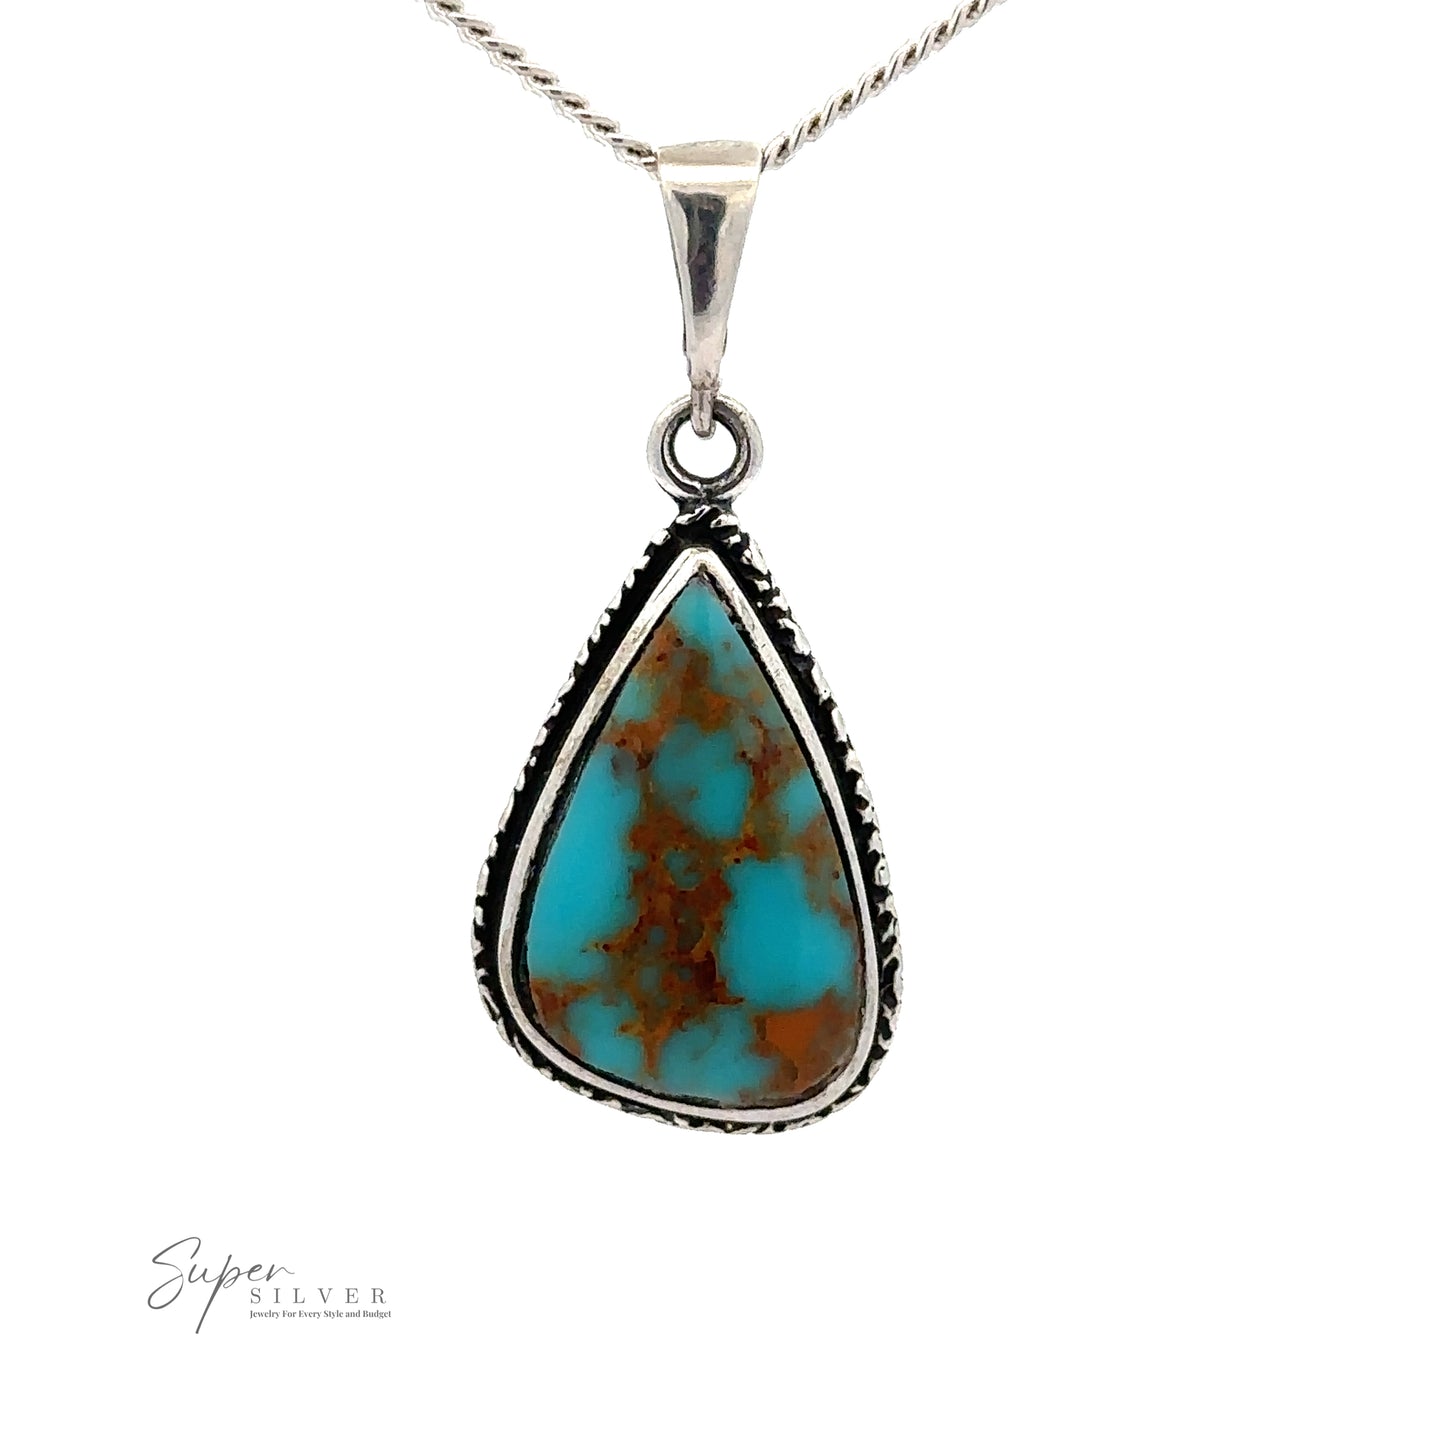 
                  
                    An Irregular Teardrop Bisbee Turquoise Pendant with Etched Border with brown veining set in a sterling silver frame hangs on a silver chain. The logo "Super Silver" is visible in the bottom left corner.
                  
                